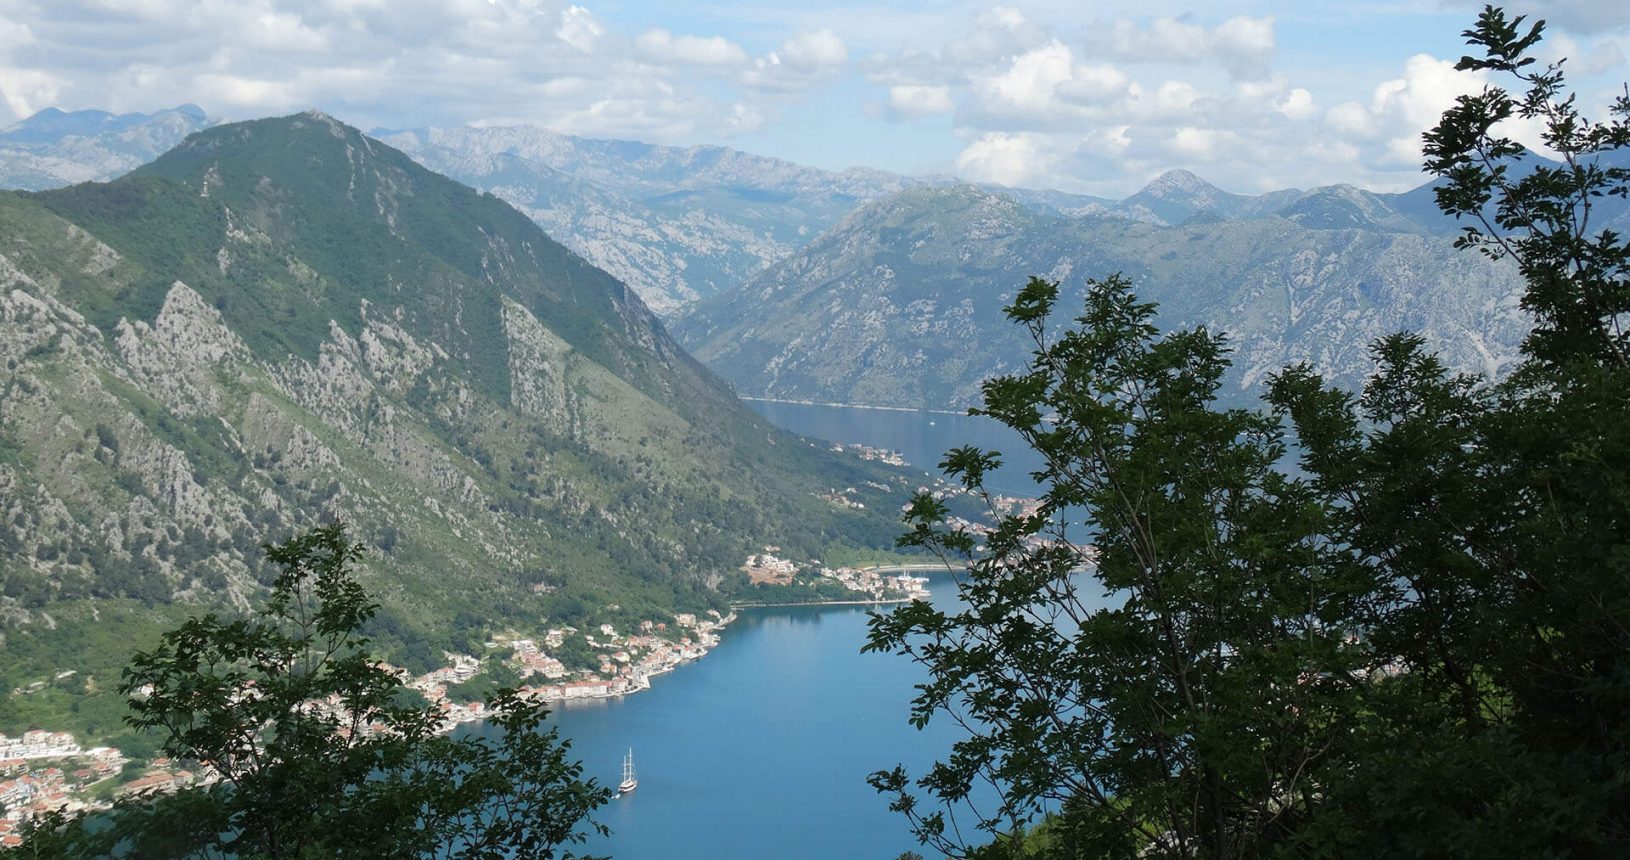 The view to the Bay of Kotor from the road to Lovcen